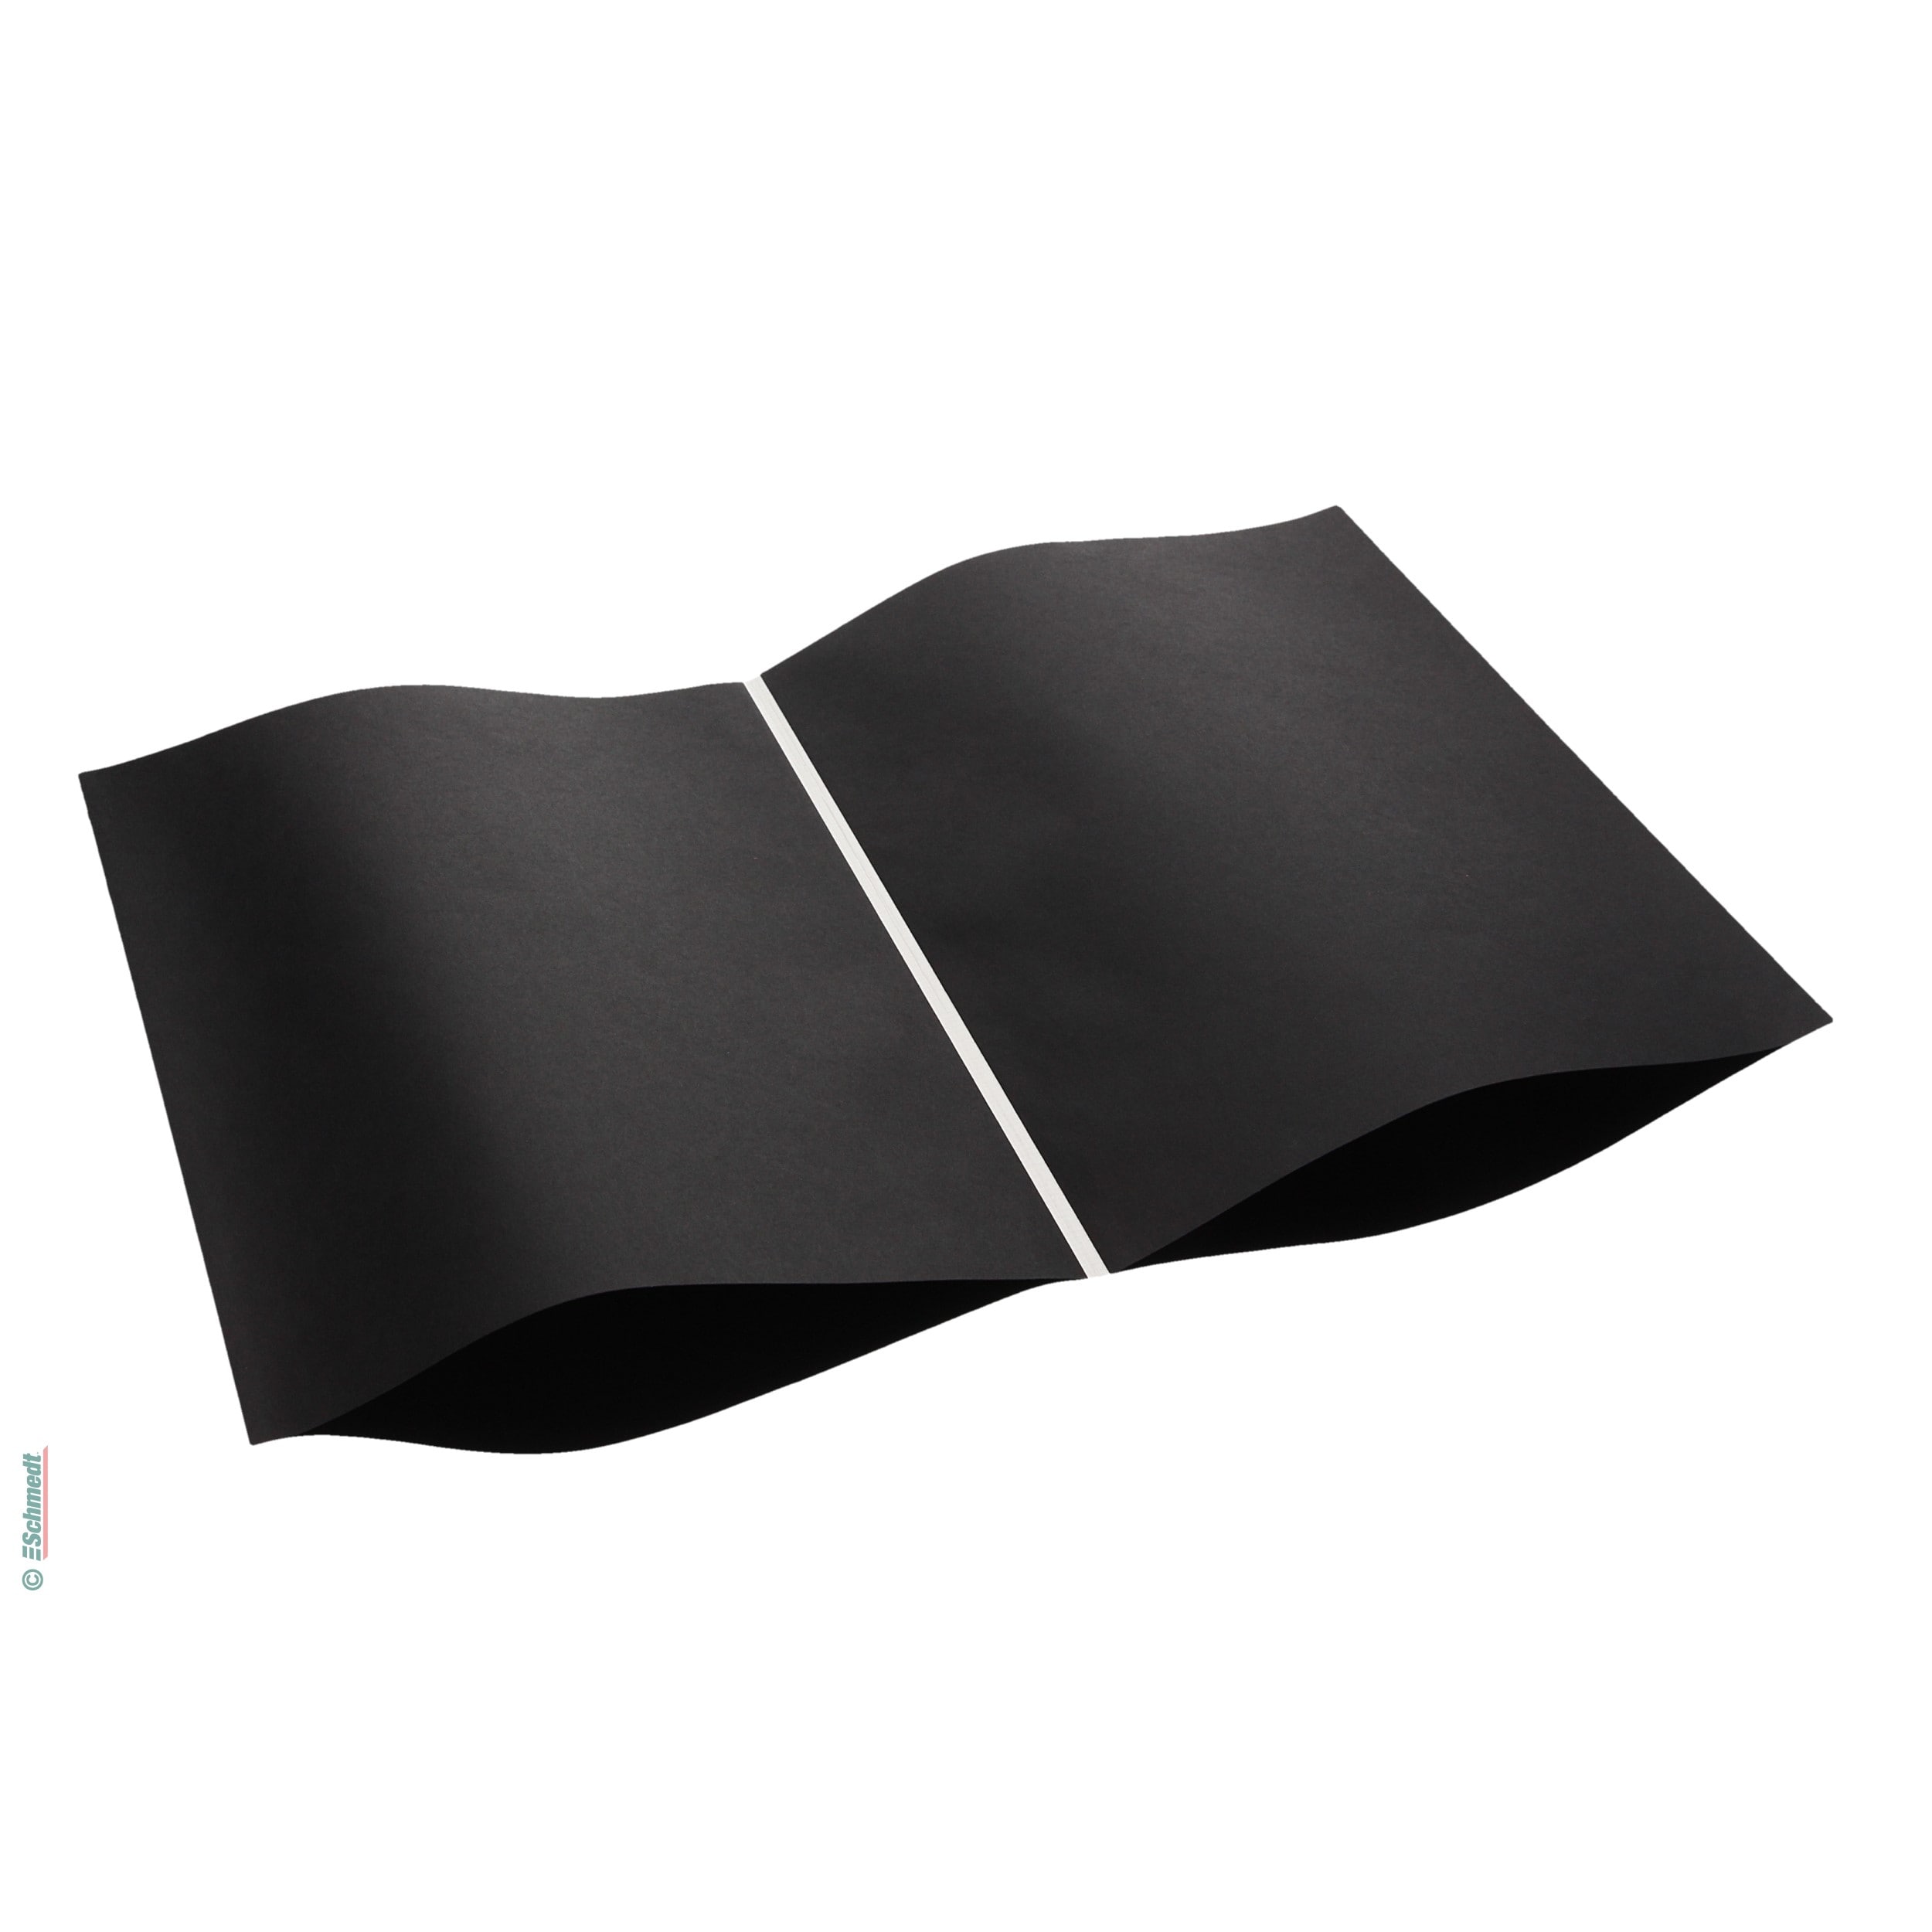 PräziCover - coloured, smooth - Colour black - Book block thickness (in mm) 7,6 - 10,5 - to produce book blocks with real endsheets for hard... - image-1